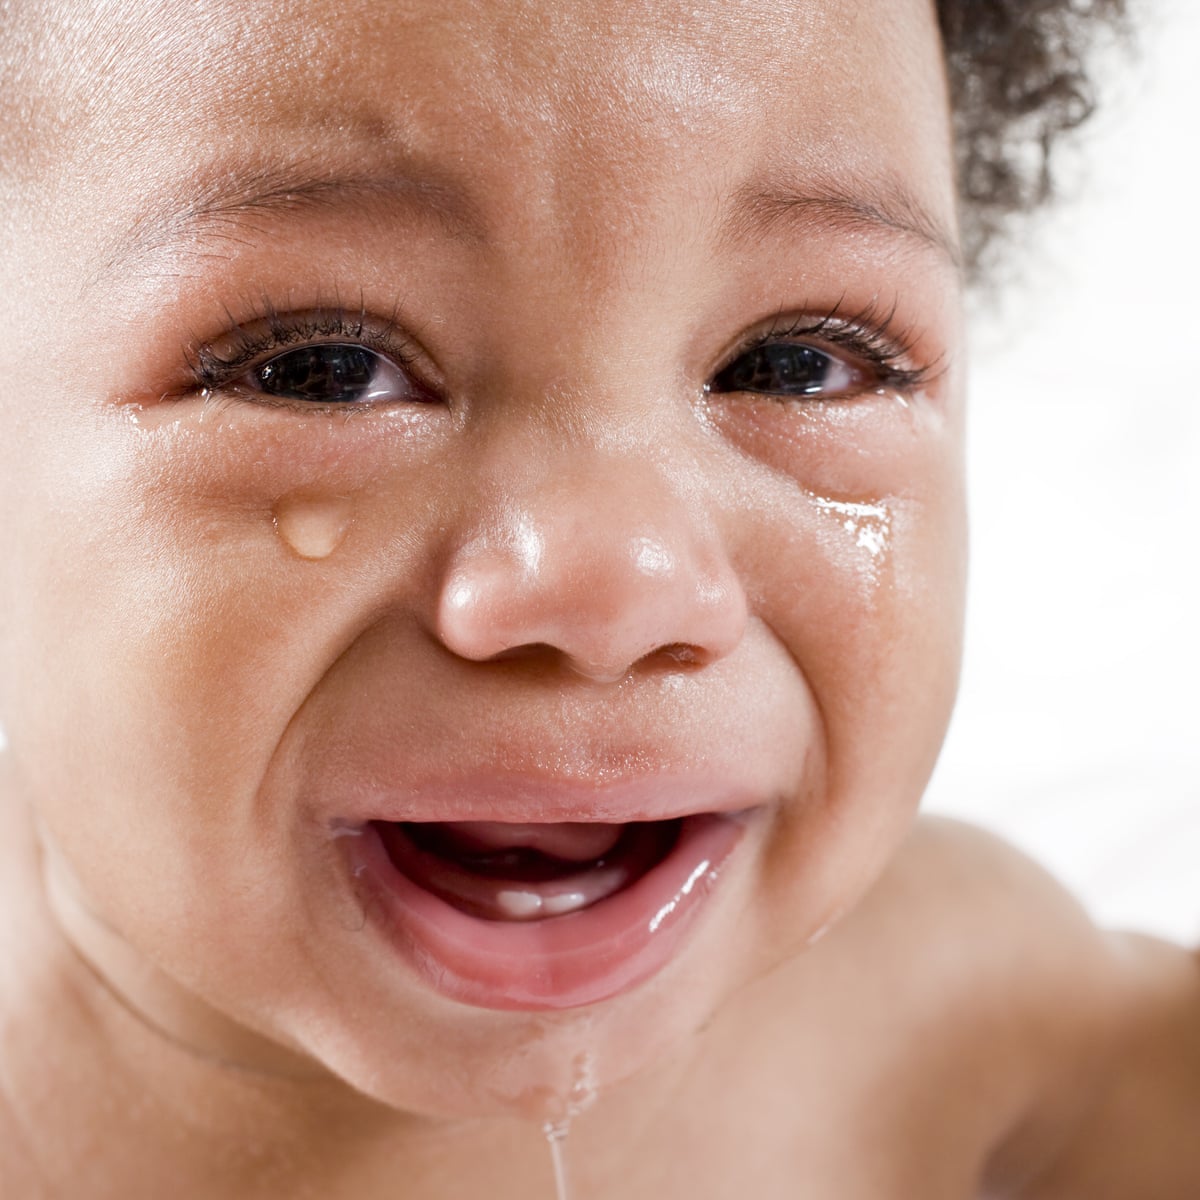 Babies in Britain, Canada and Italy cry more than elsewhere – study |  Children | The Guardian